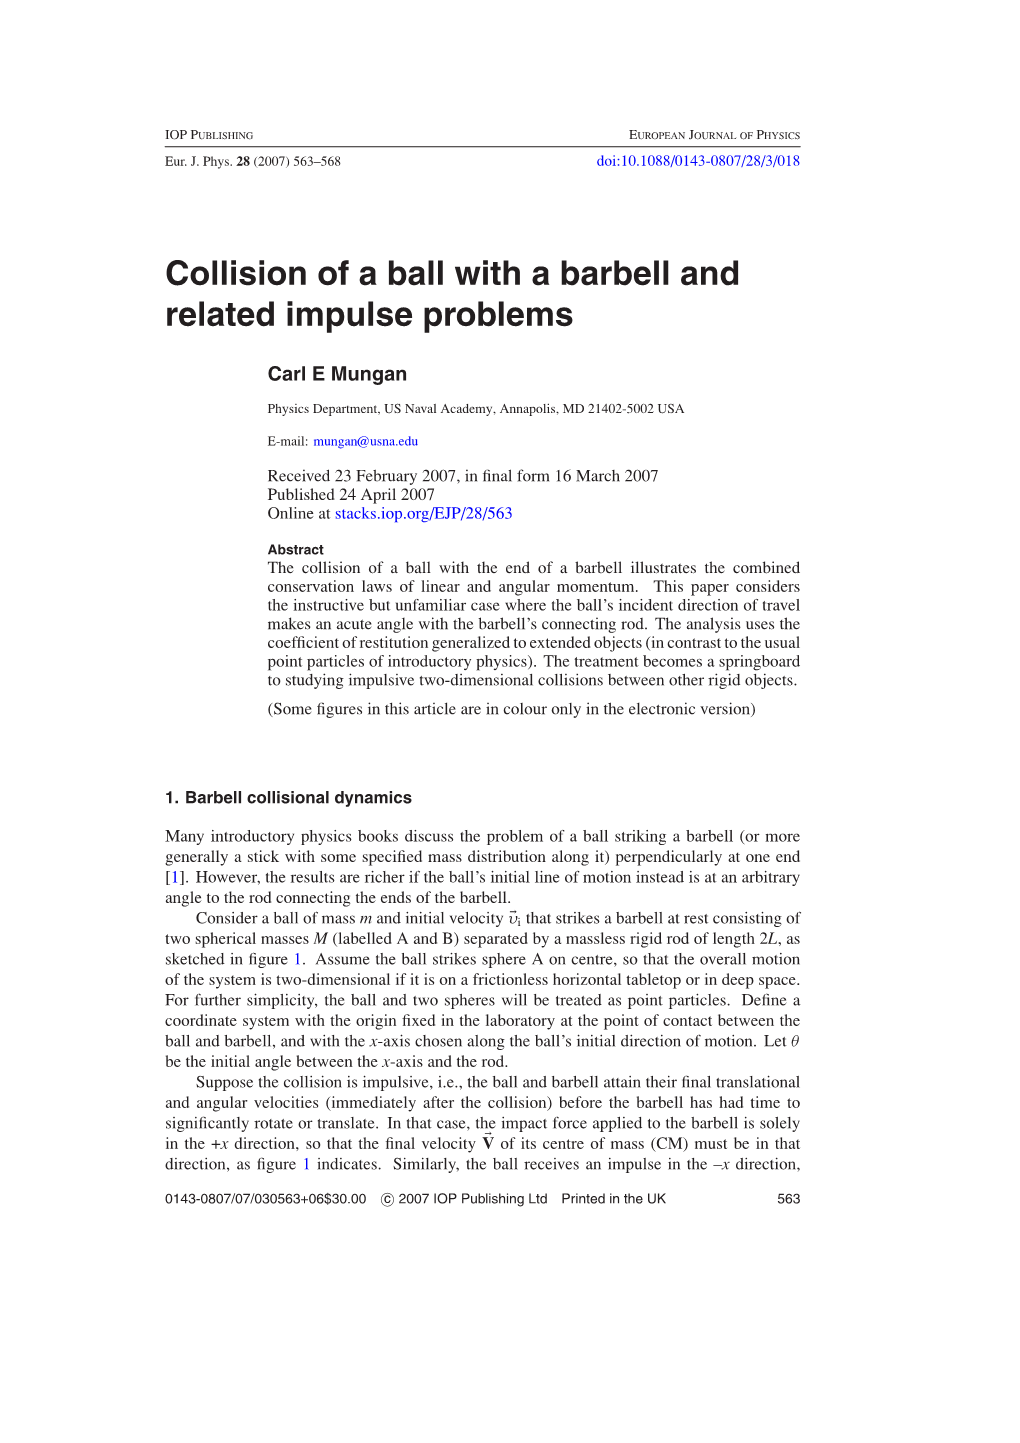 Collision of a Ball with a Barbell and Related Impulse Problems